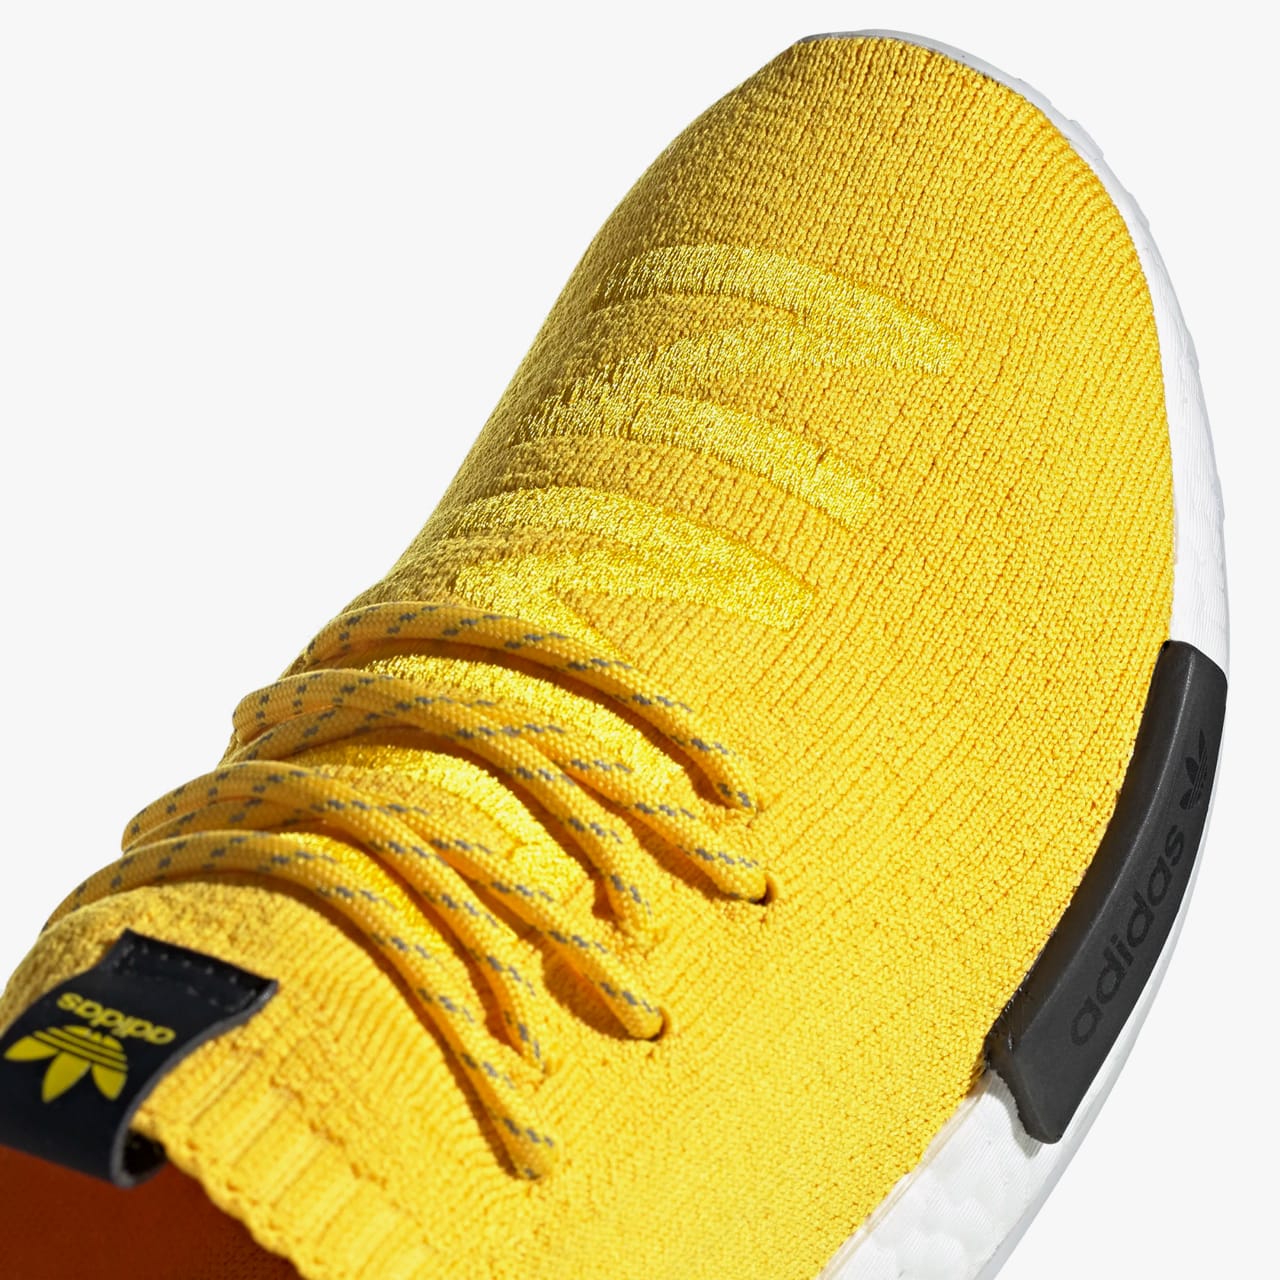 nmd boost turning yellow